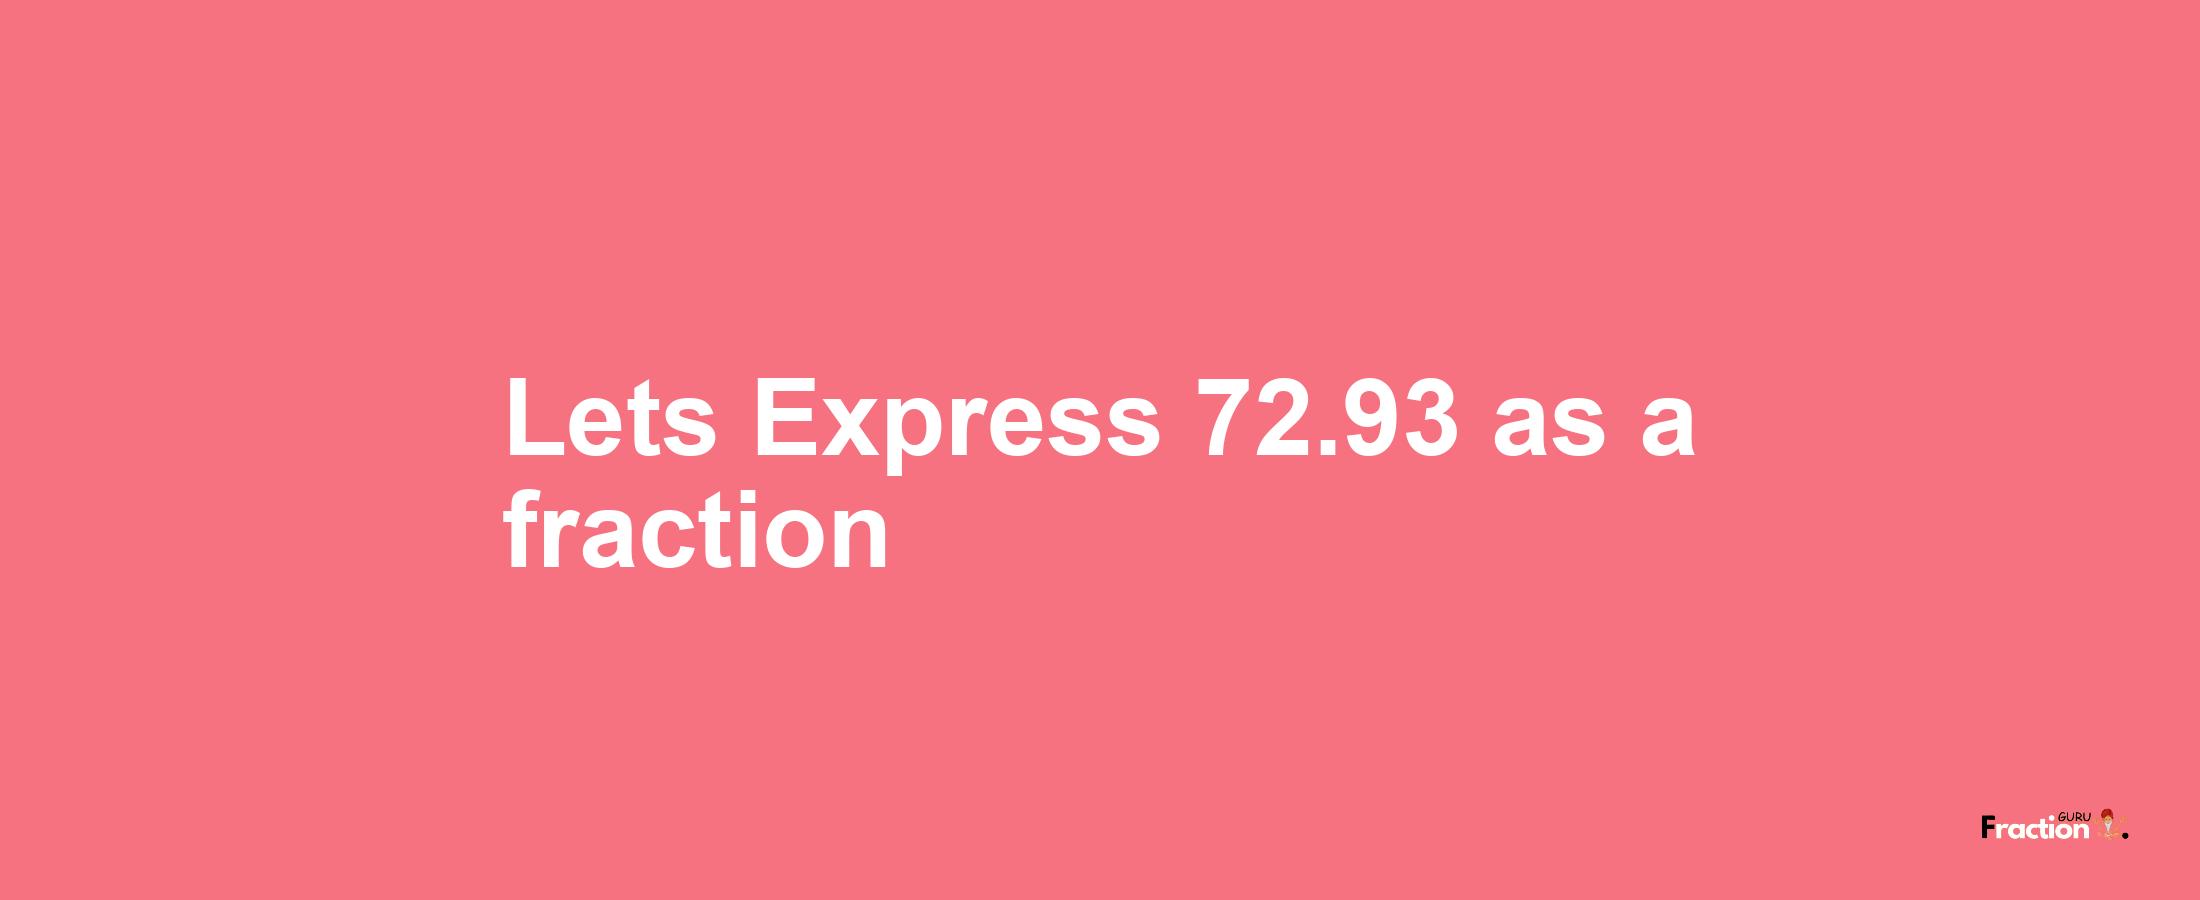 Lets Express 72.93 as afraction